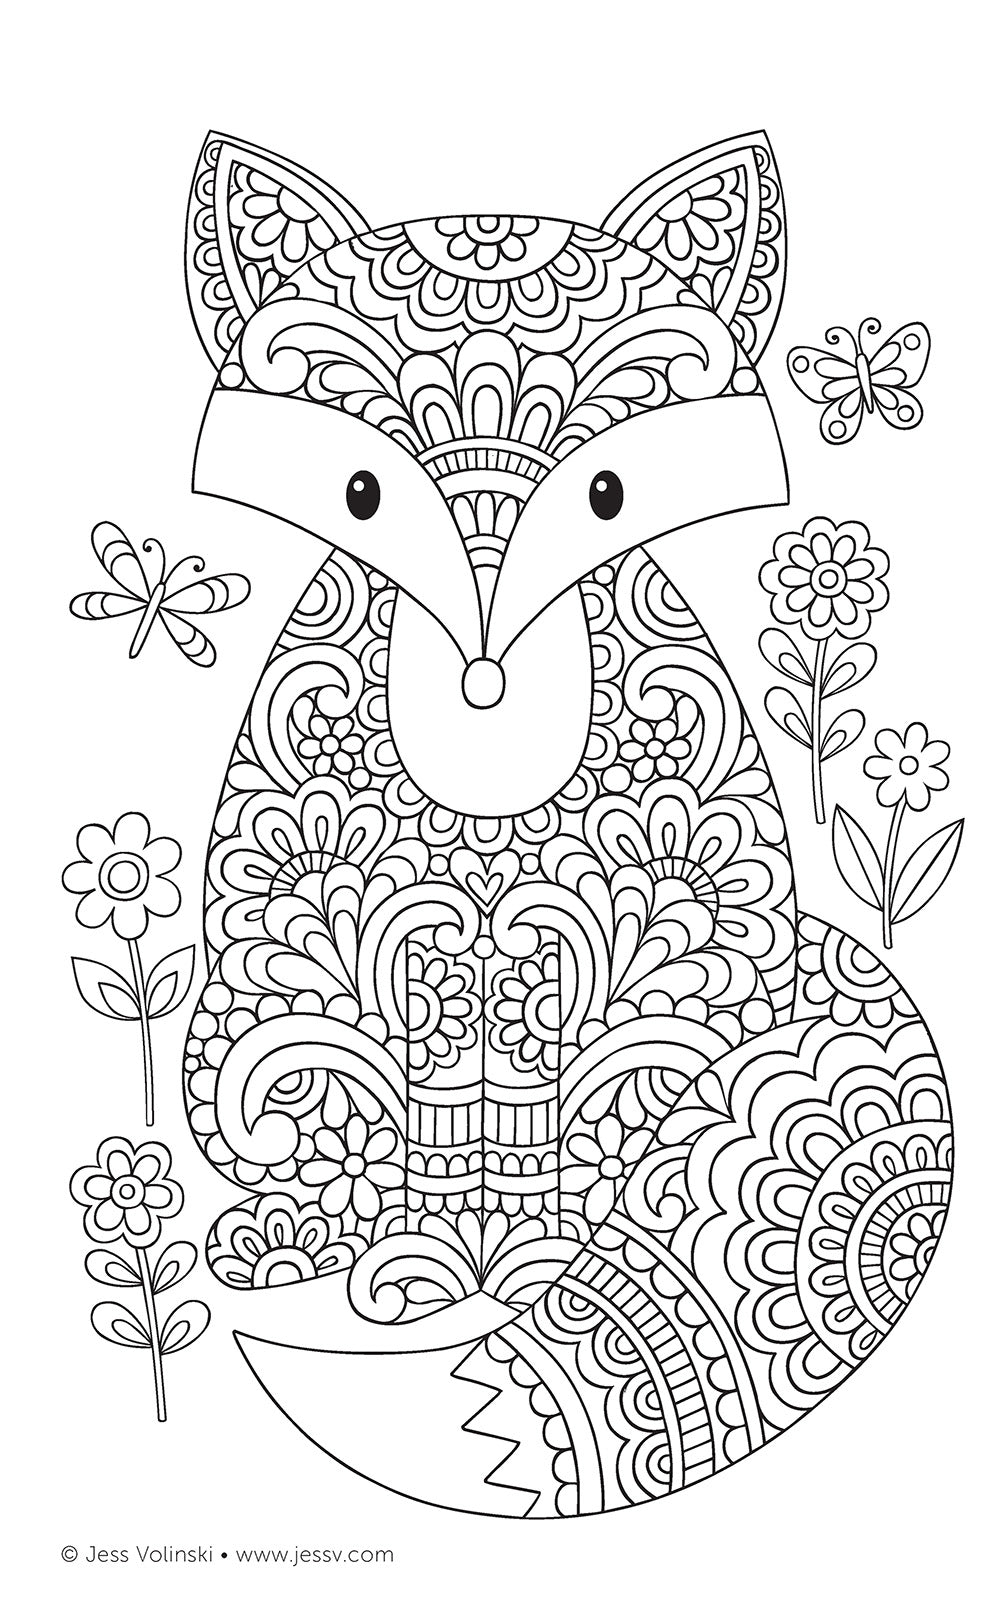 Color Cute Coloring Book - (on-the-go Coloring Book) By Jess